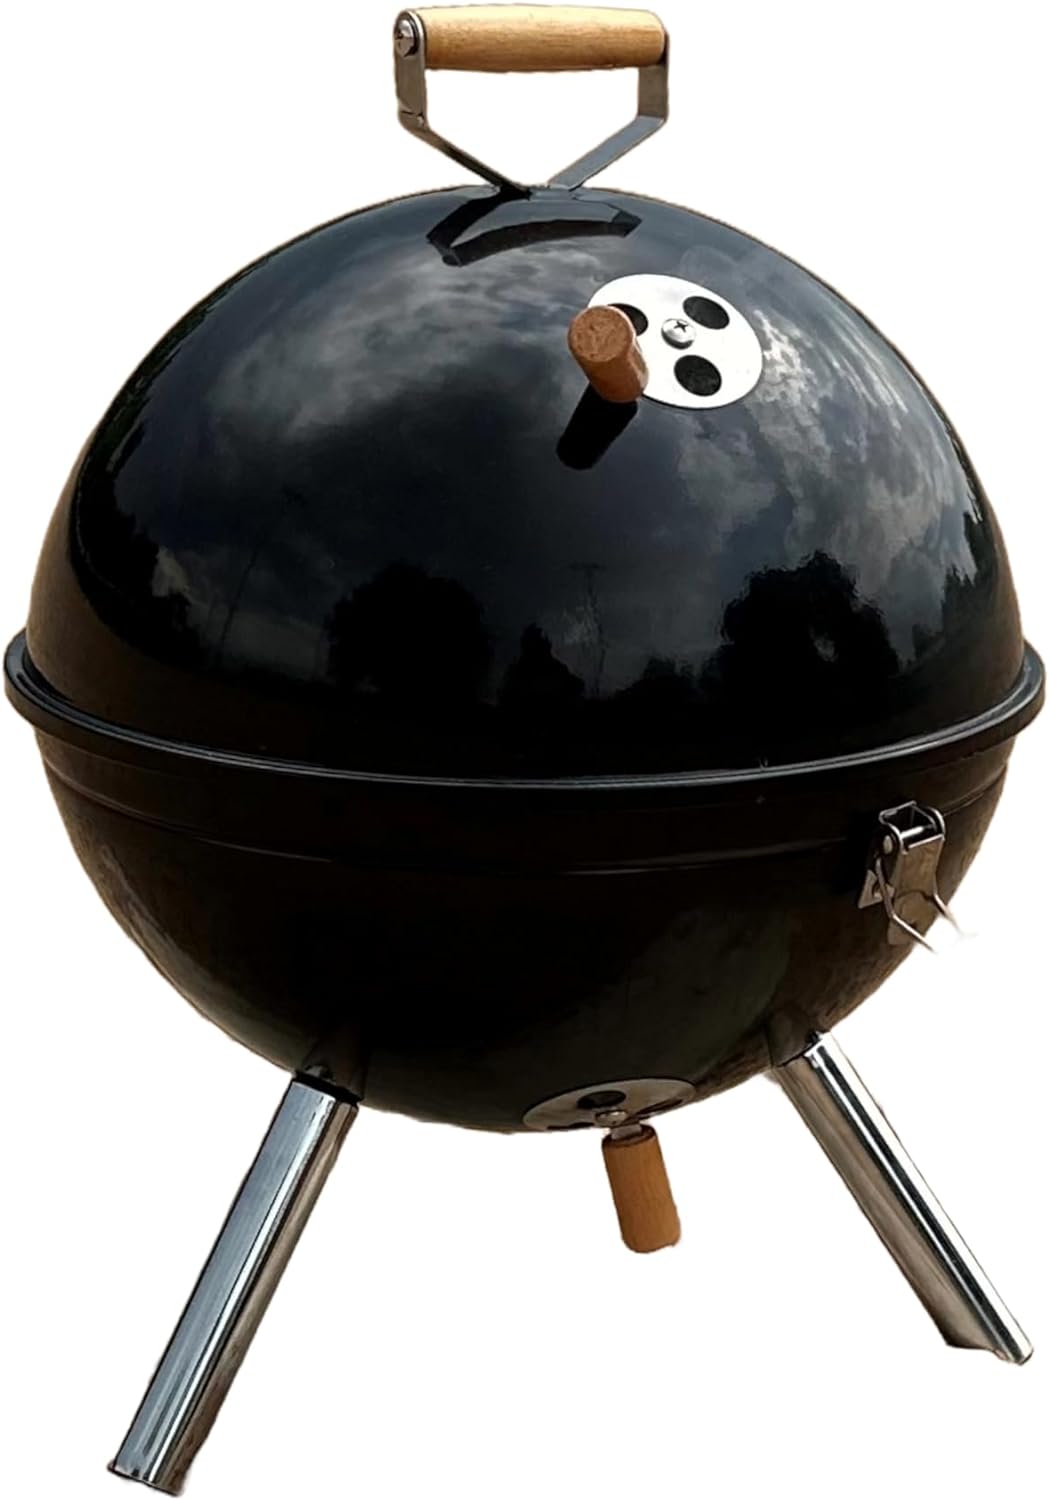 Freedom Stove Ball-B-Q Grill Review